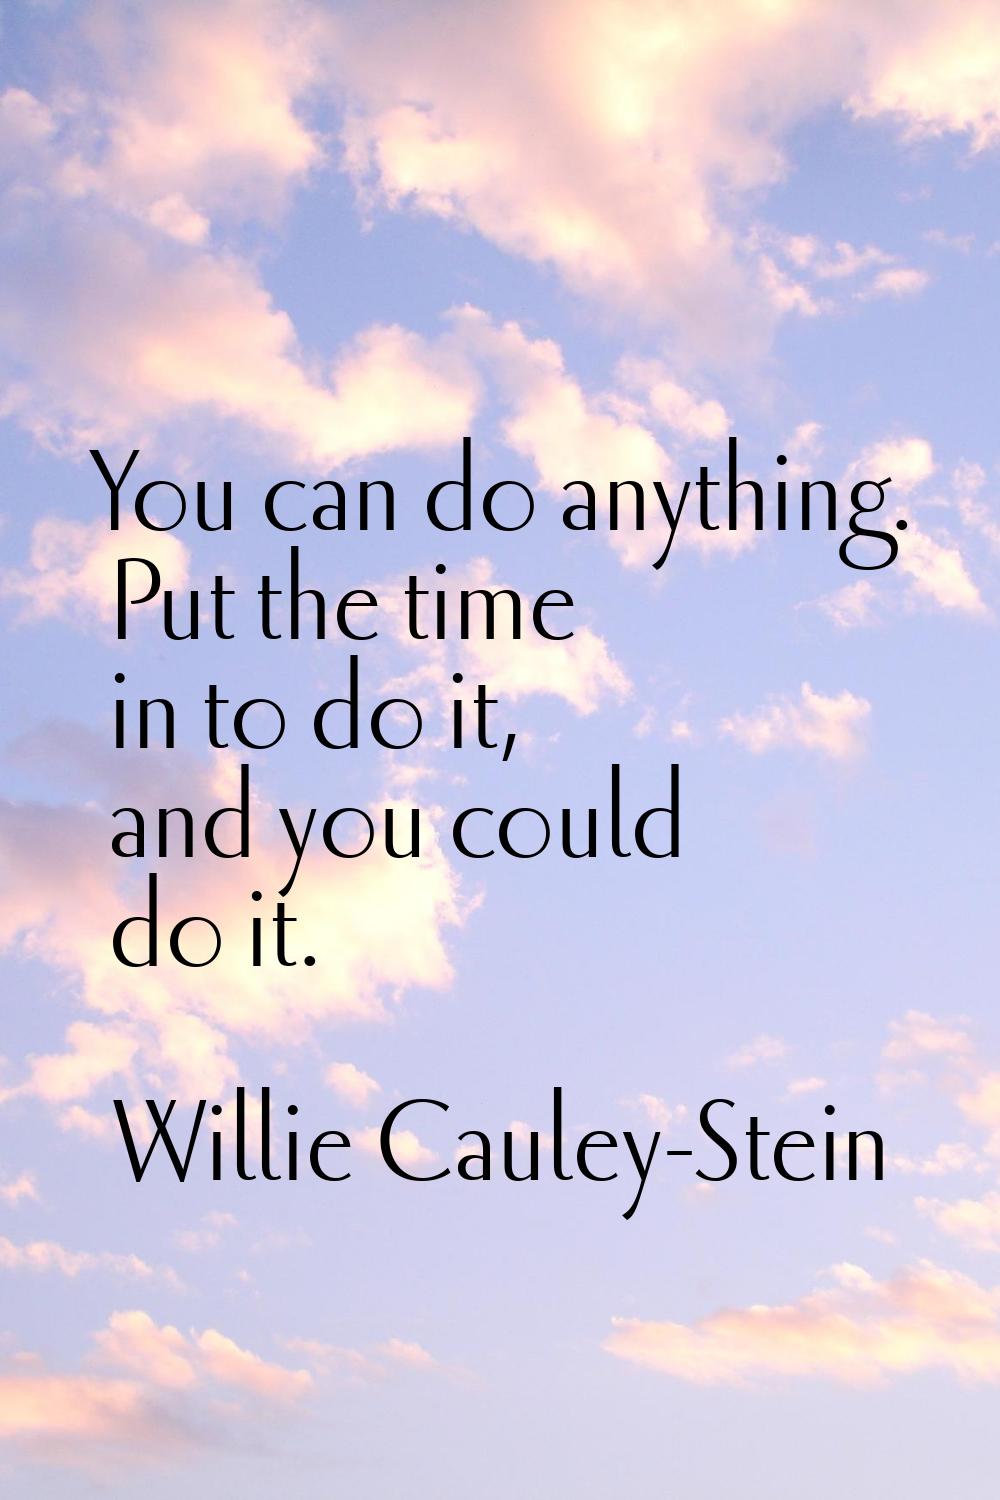 You can do anything. Put the time in to do it, and you could do it.